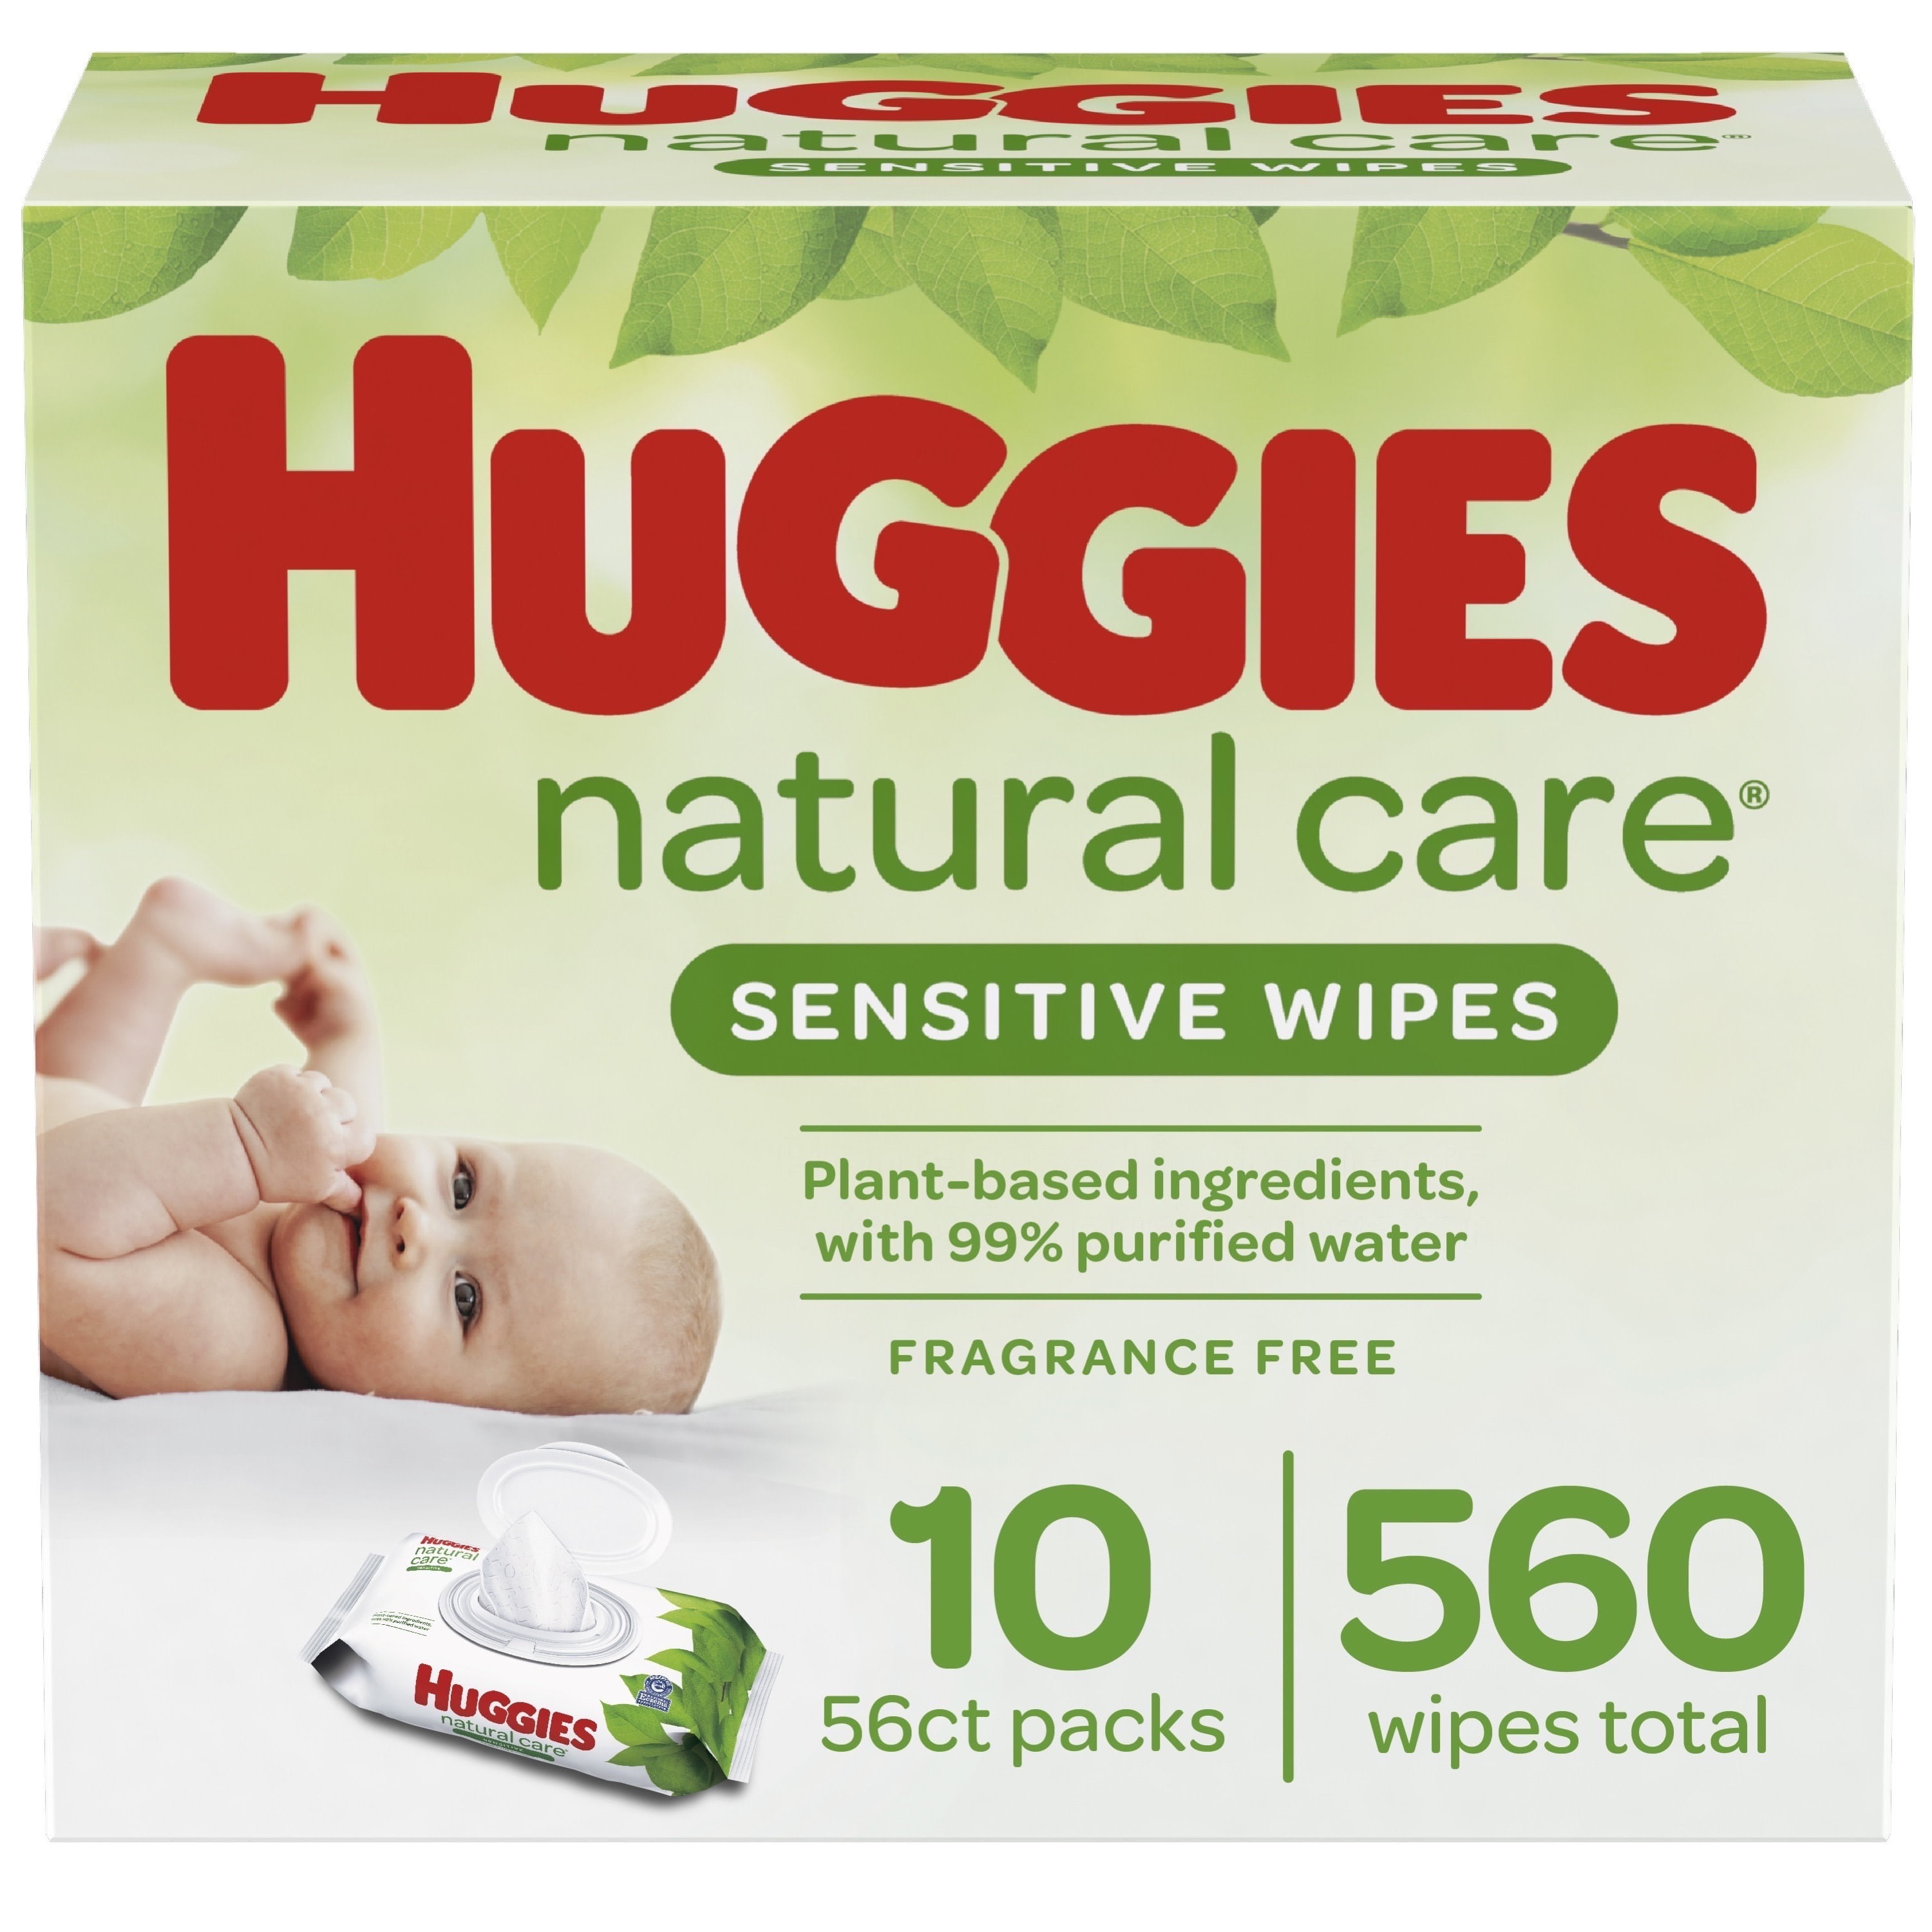 Huggies baby wipes - Natural Care - 560 wipes - Value pack